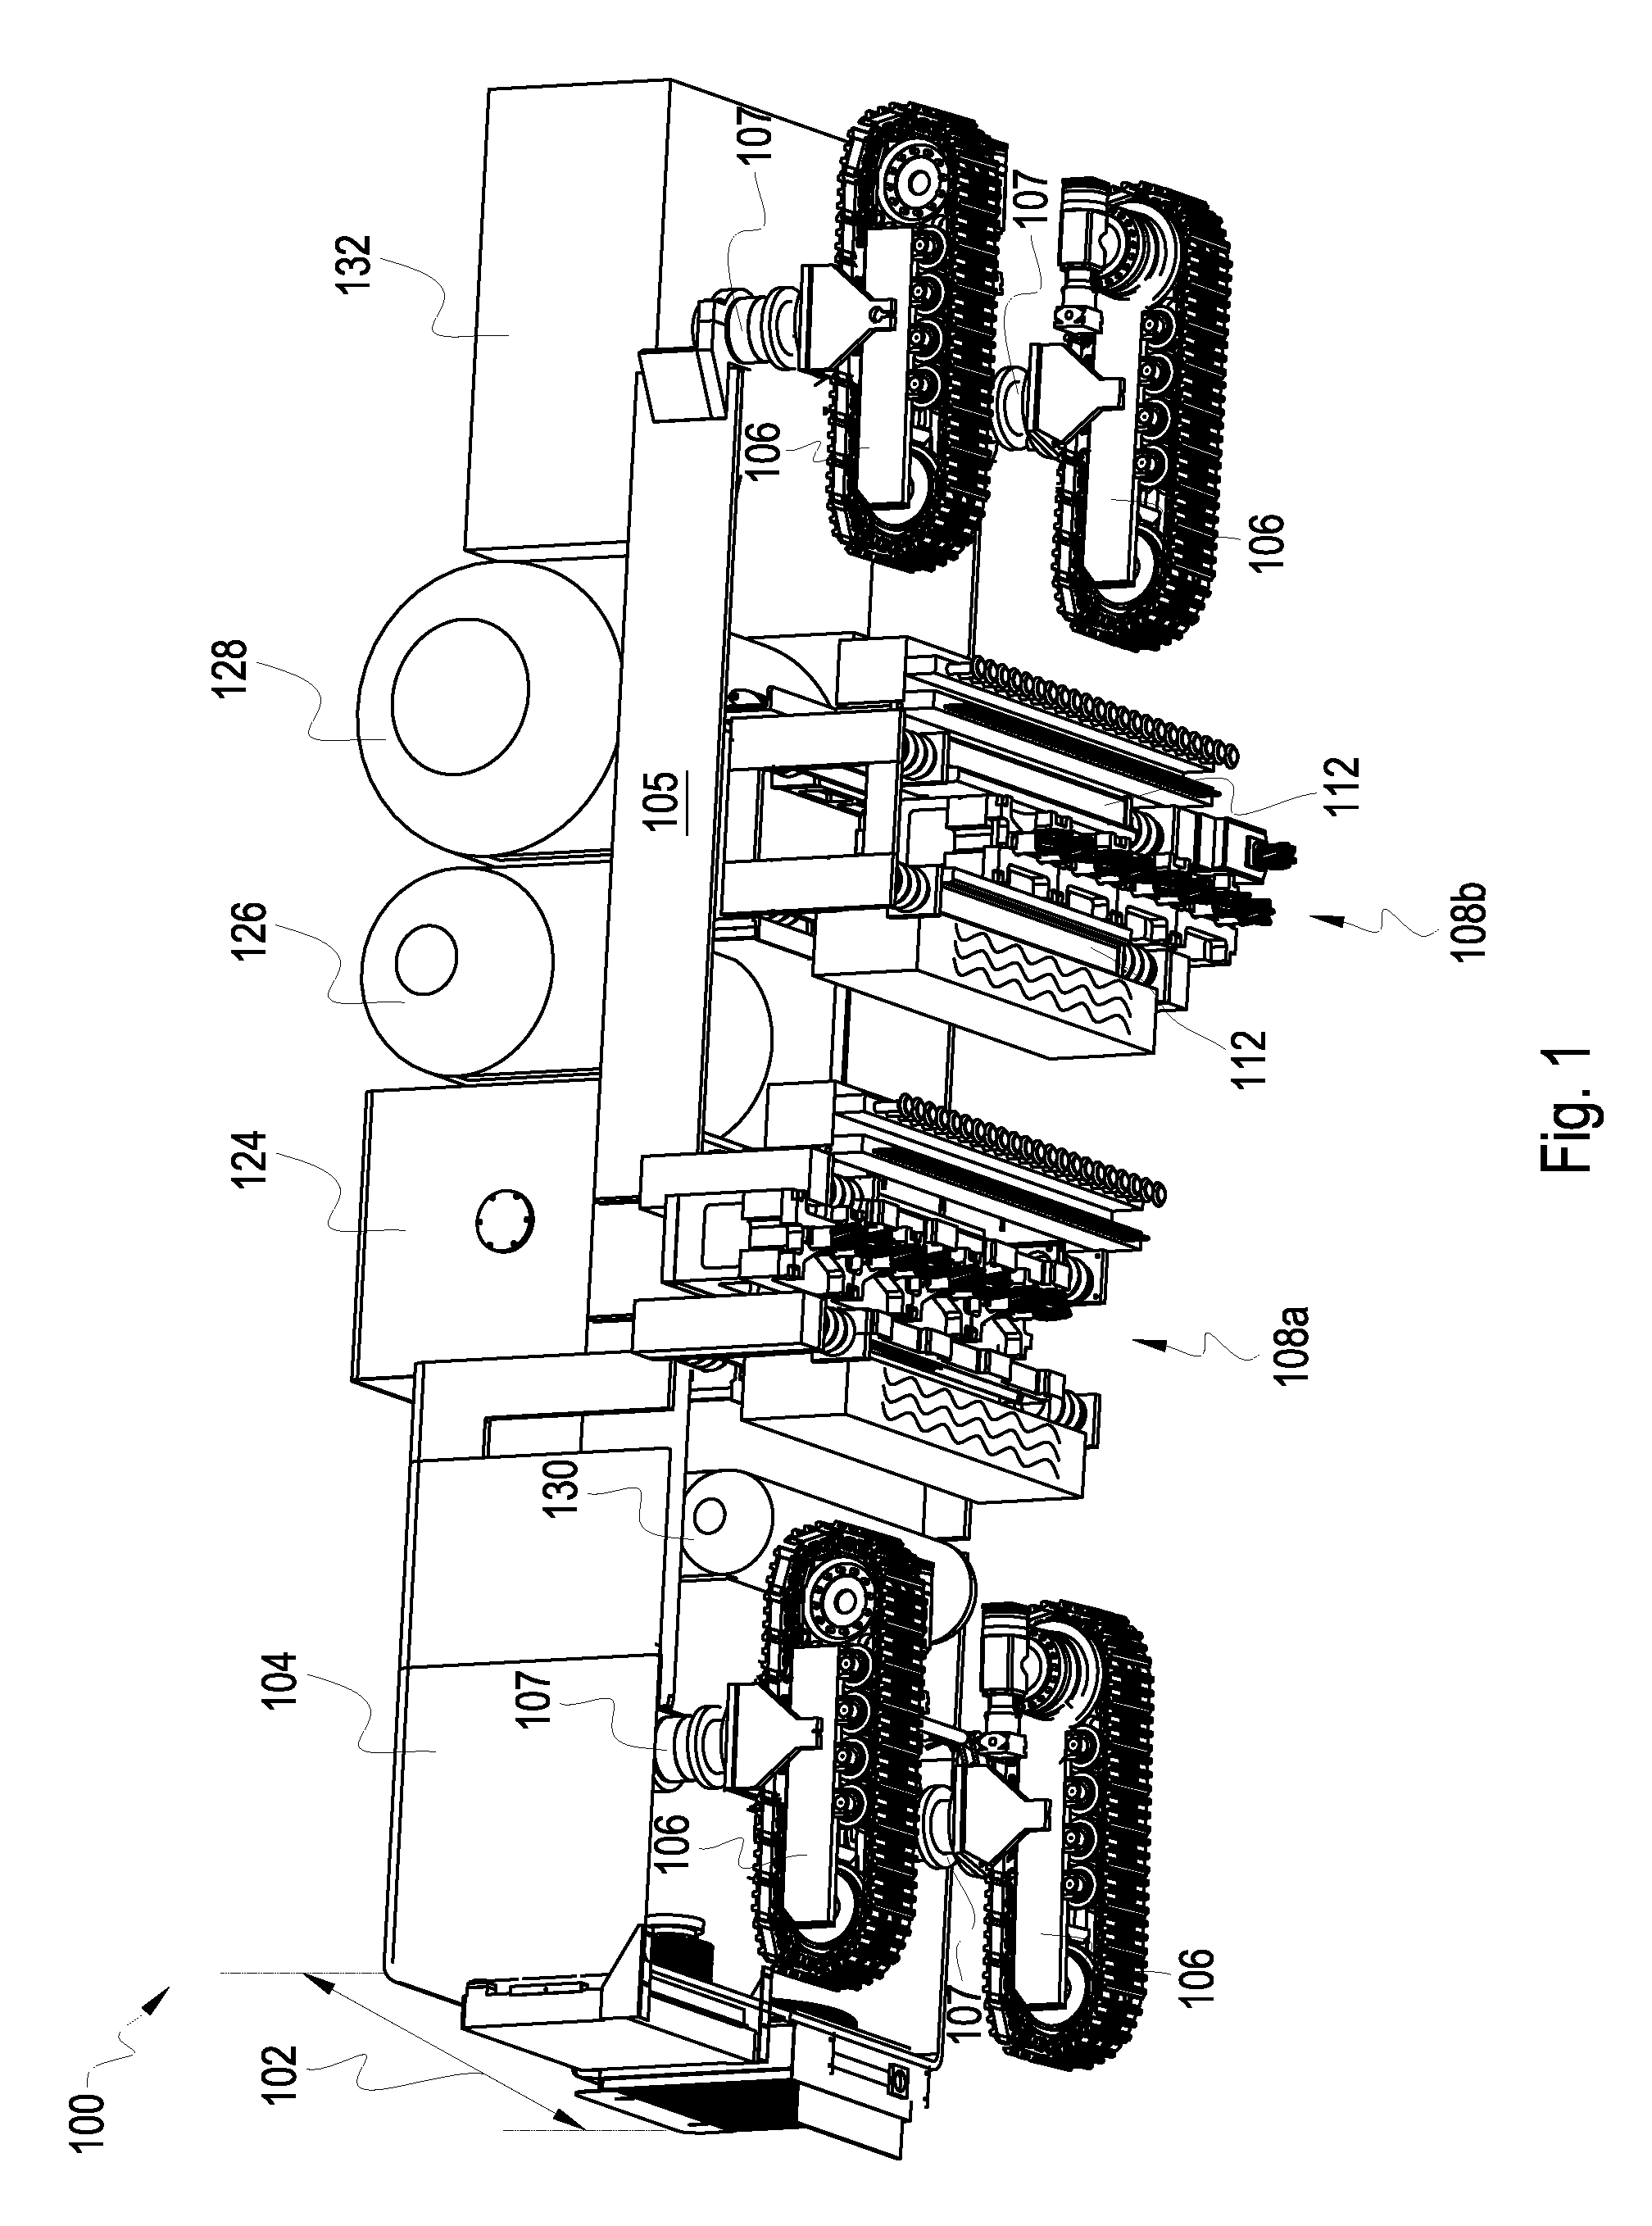 Method for depositing pavement rejuvenation material into a layer of aggregate